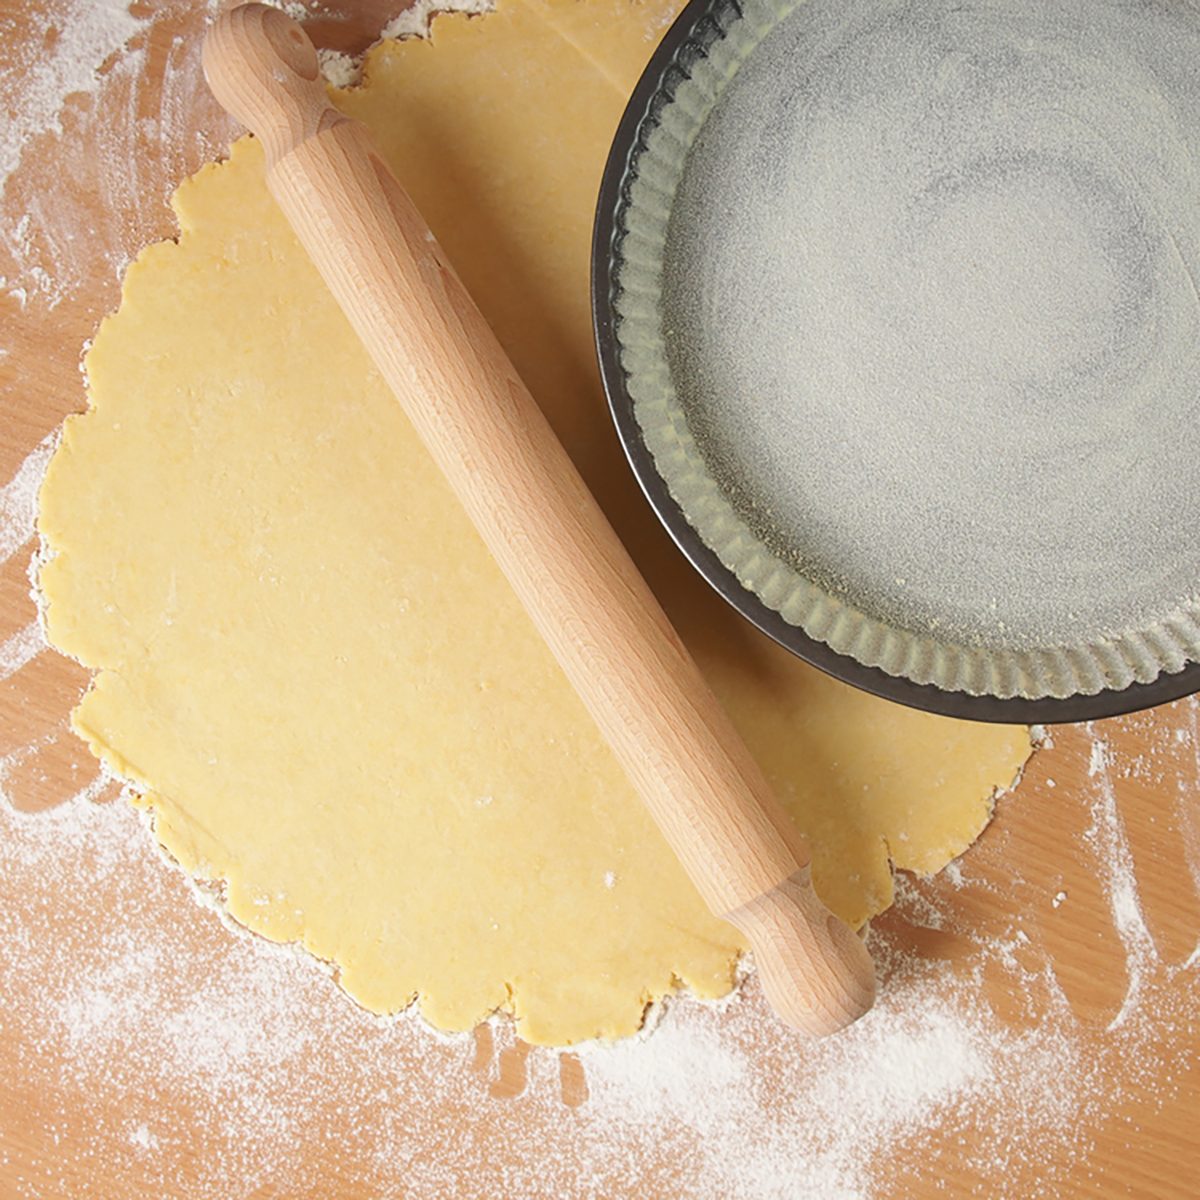 Pastry round, rolling pin and pie pan